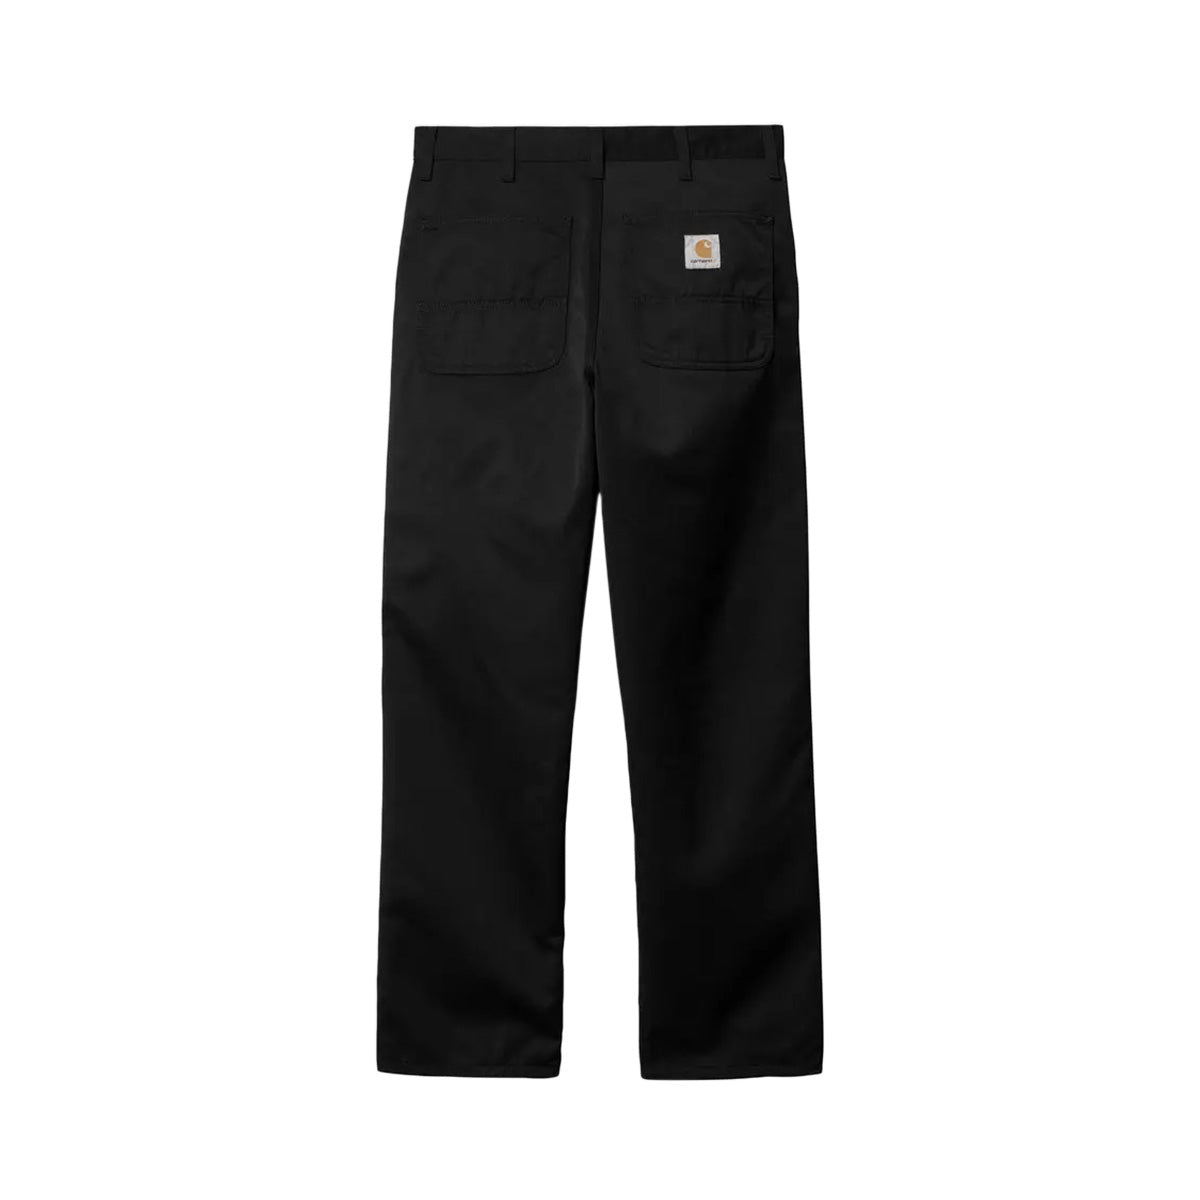 CARHARTT WIP SIMPLE PANT - BLACK – Reserve Supply Company